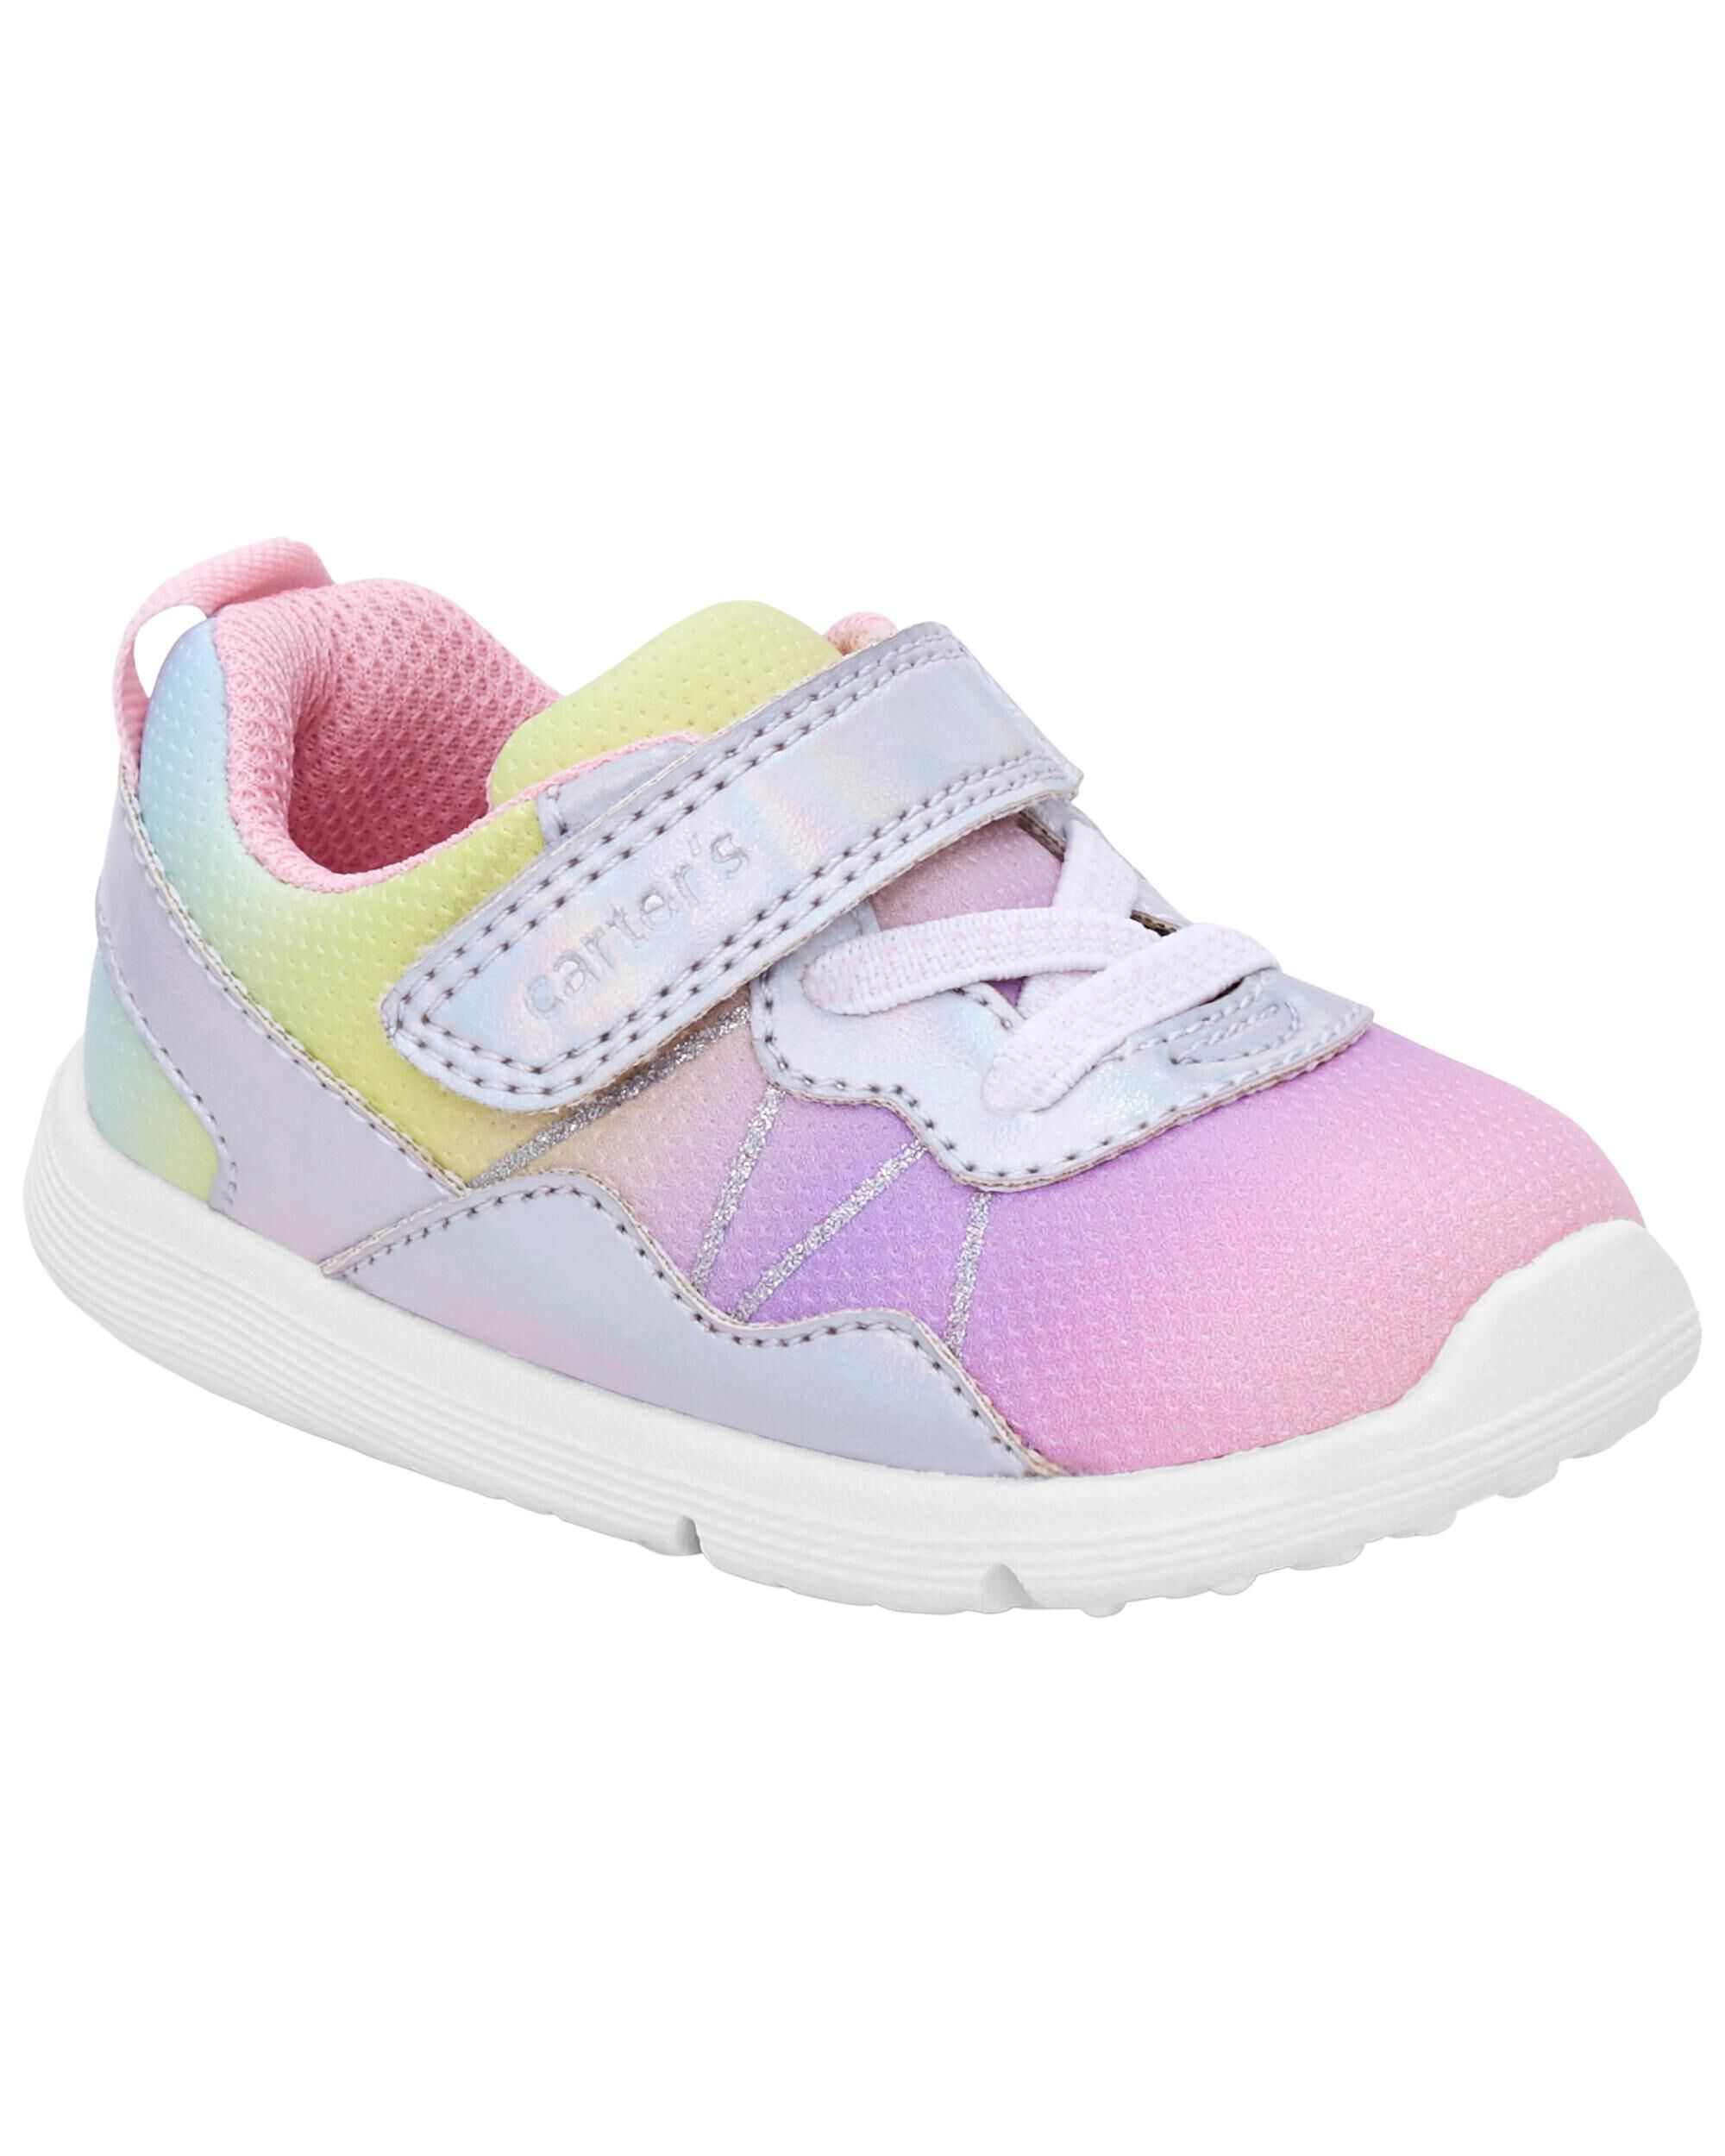 Carters Every Step Sneaker